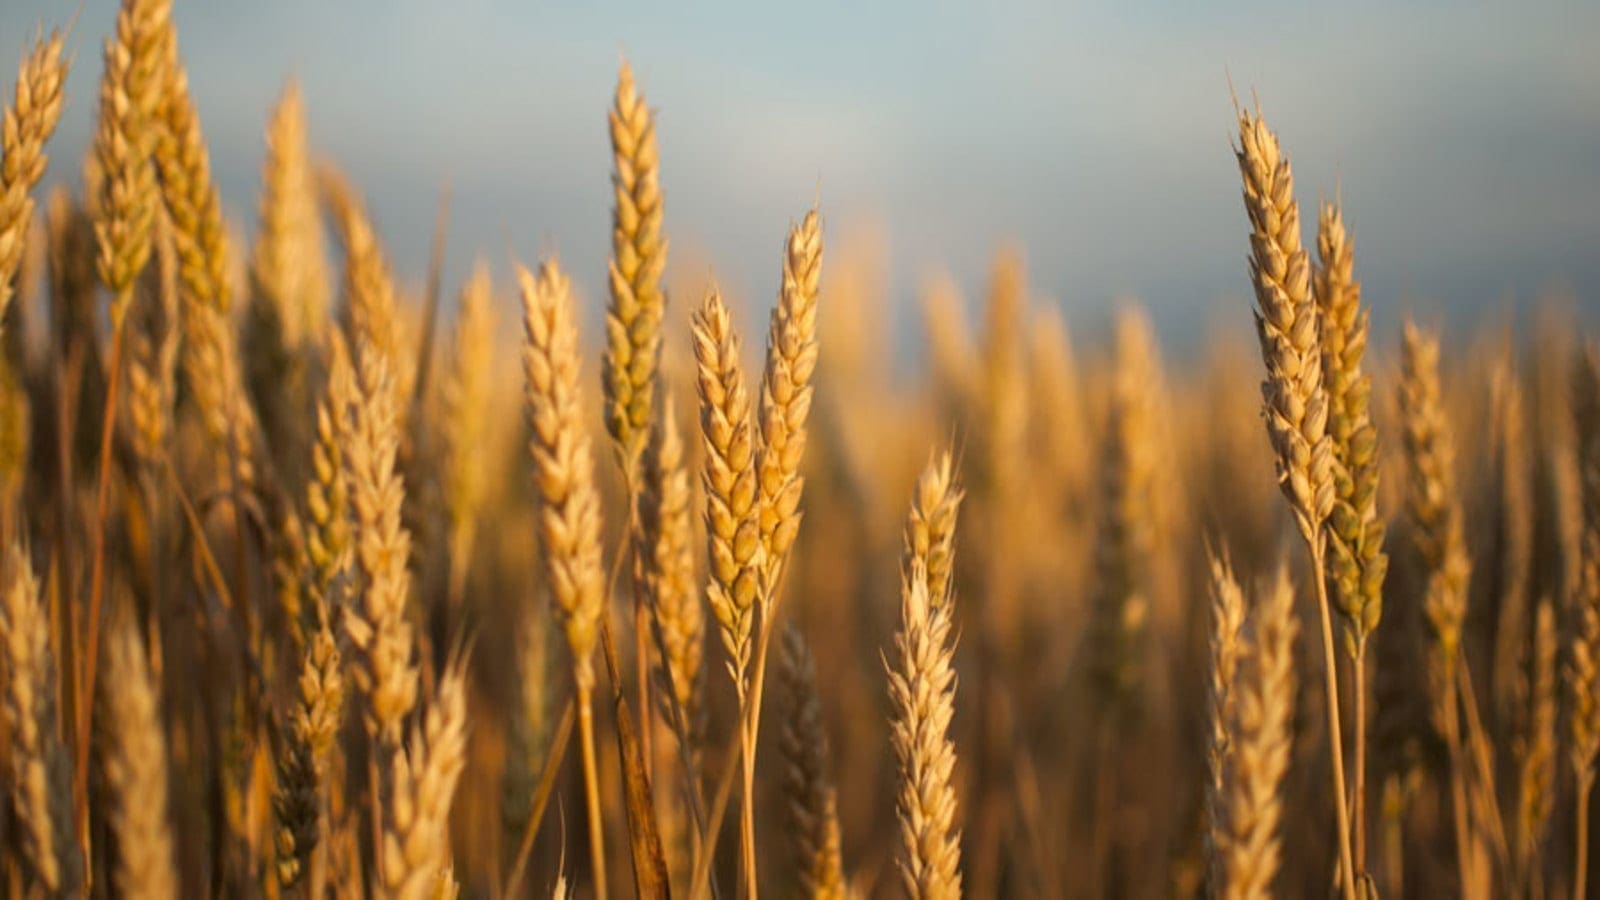 Canada wheat exports plummet 4% in TY 2019/20 despite increase in quality